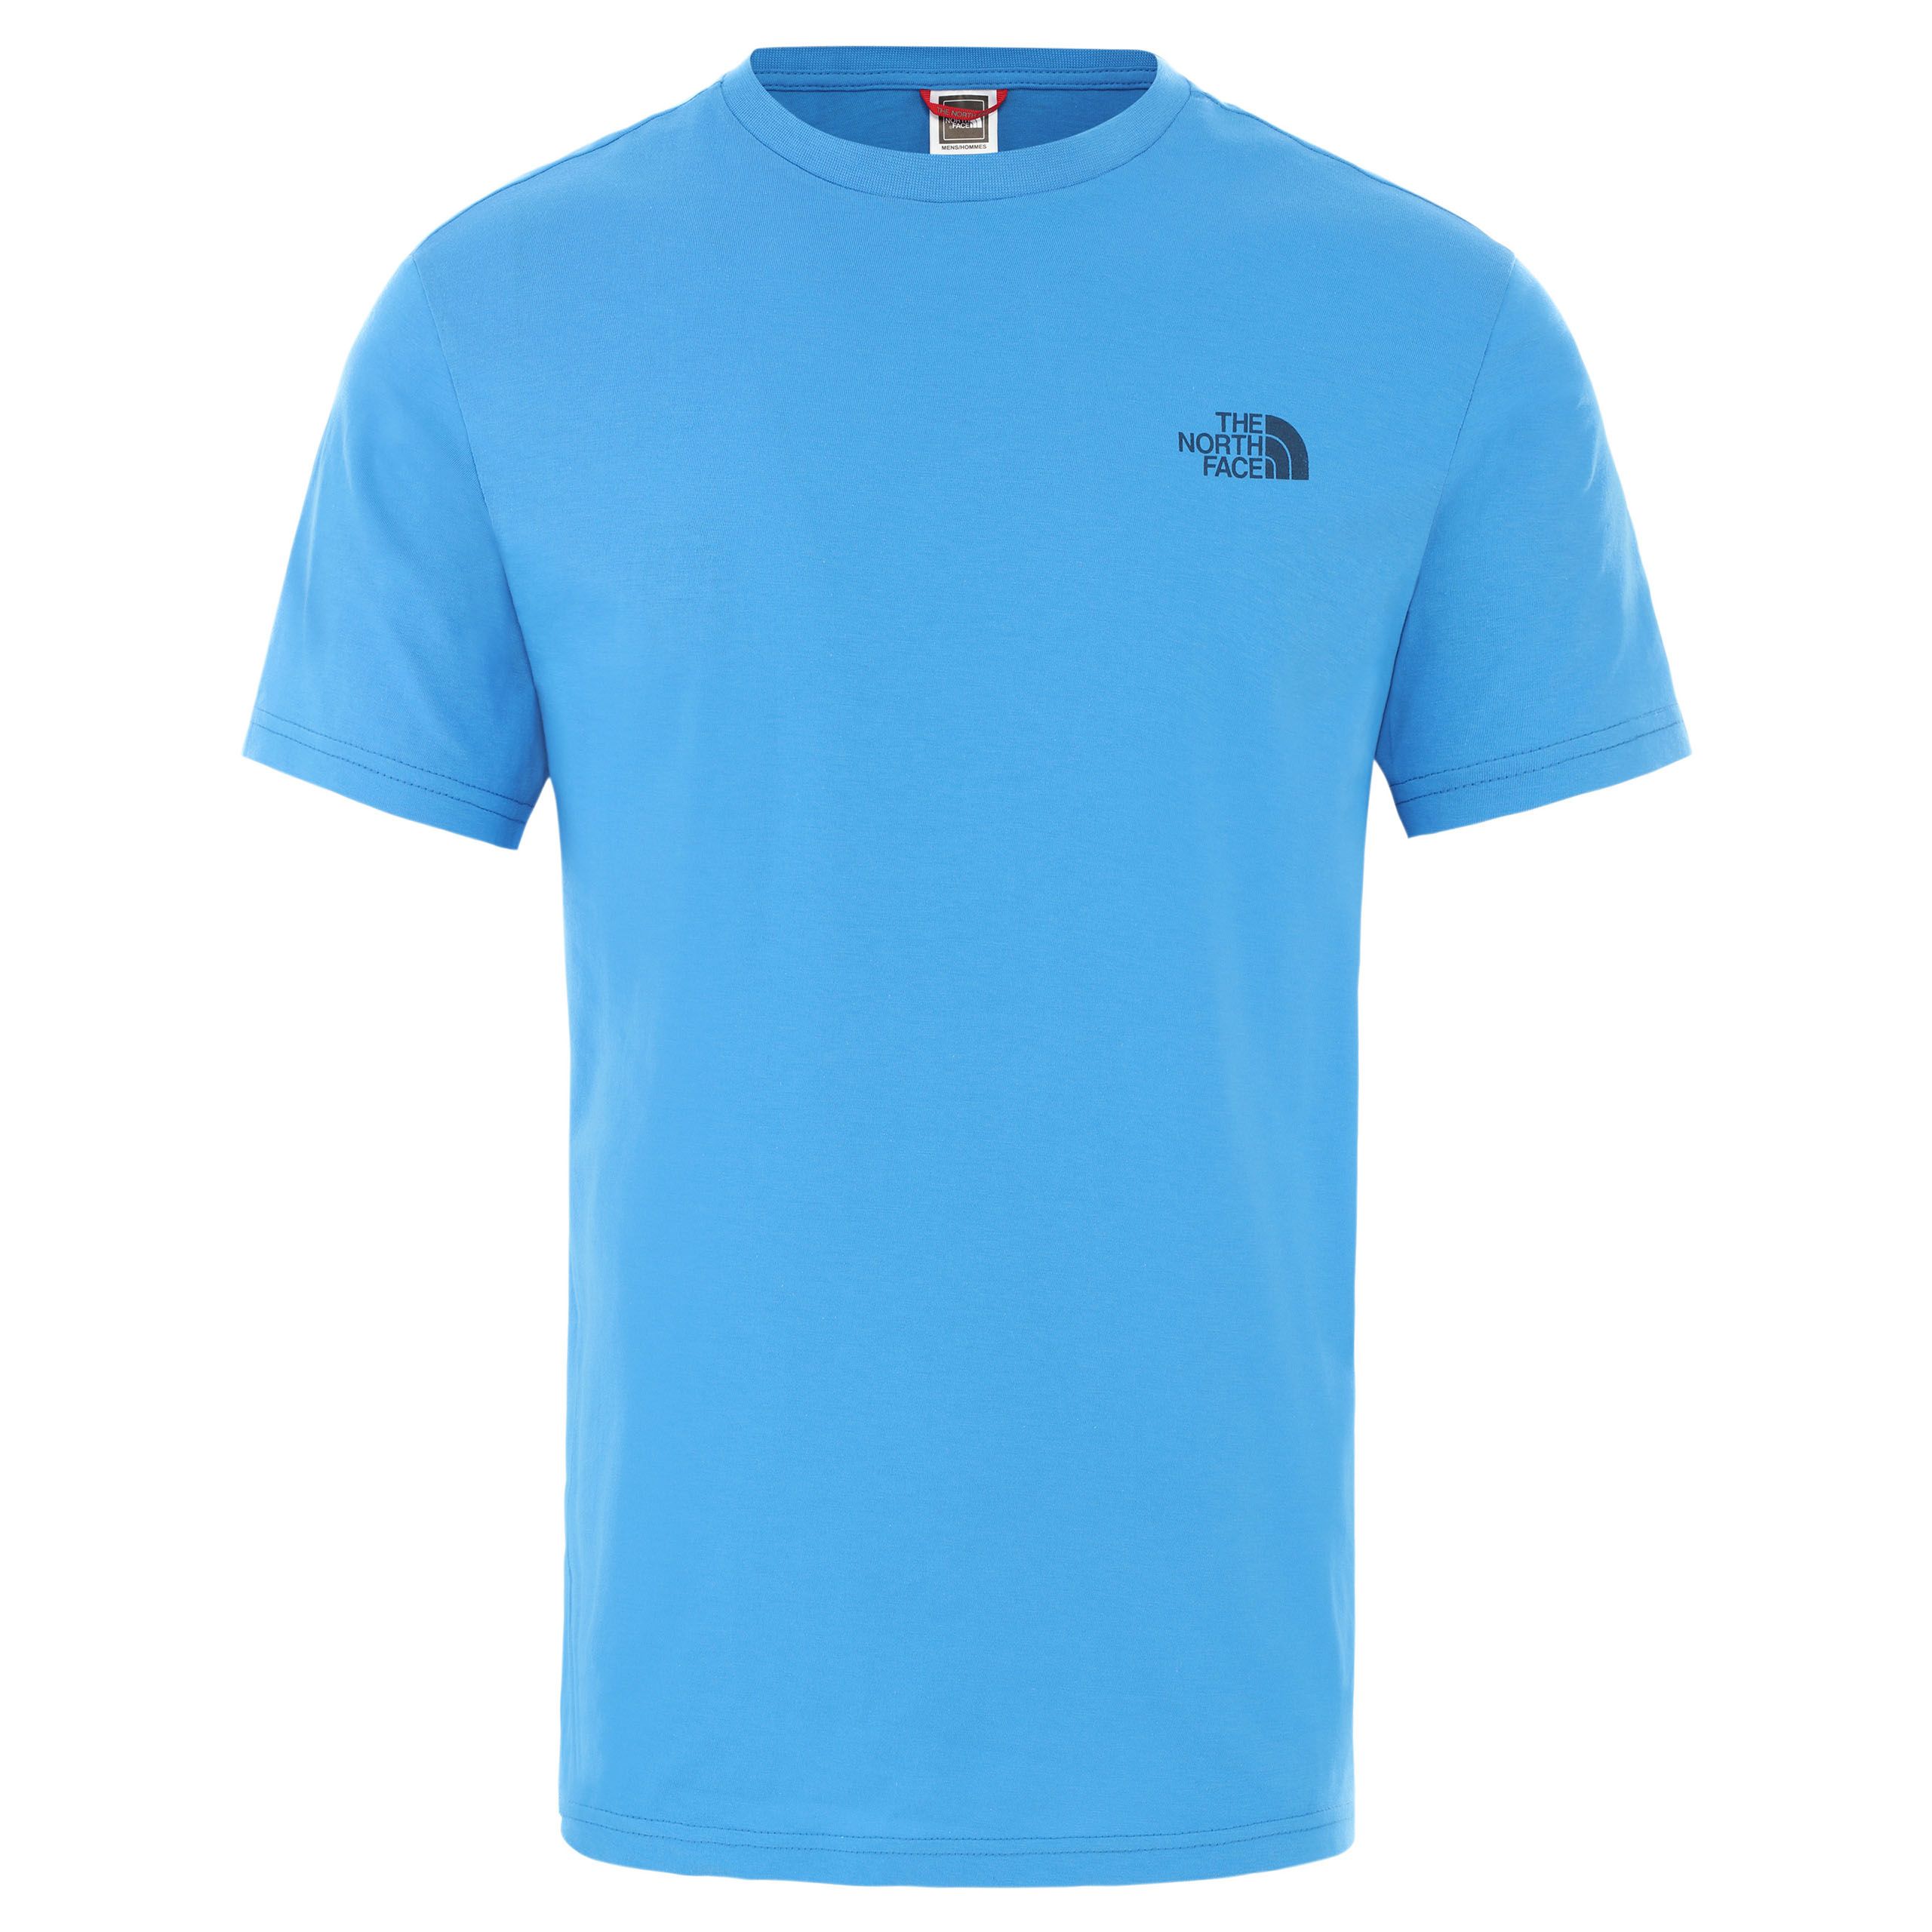 The North Face Mens Simple Dome T-shirt